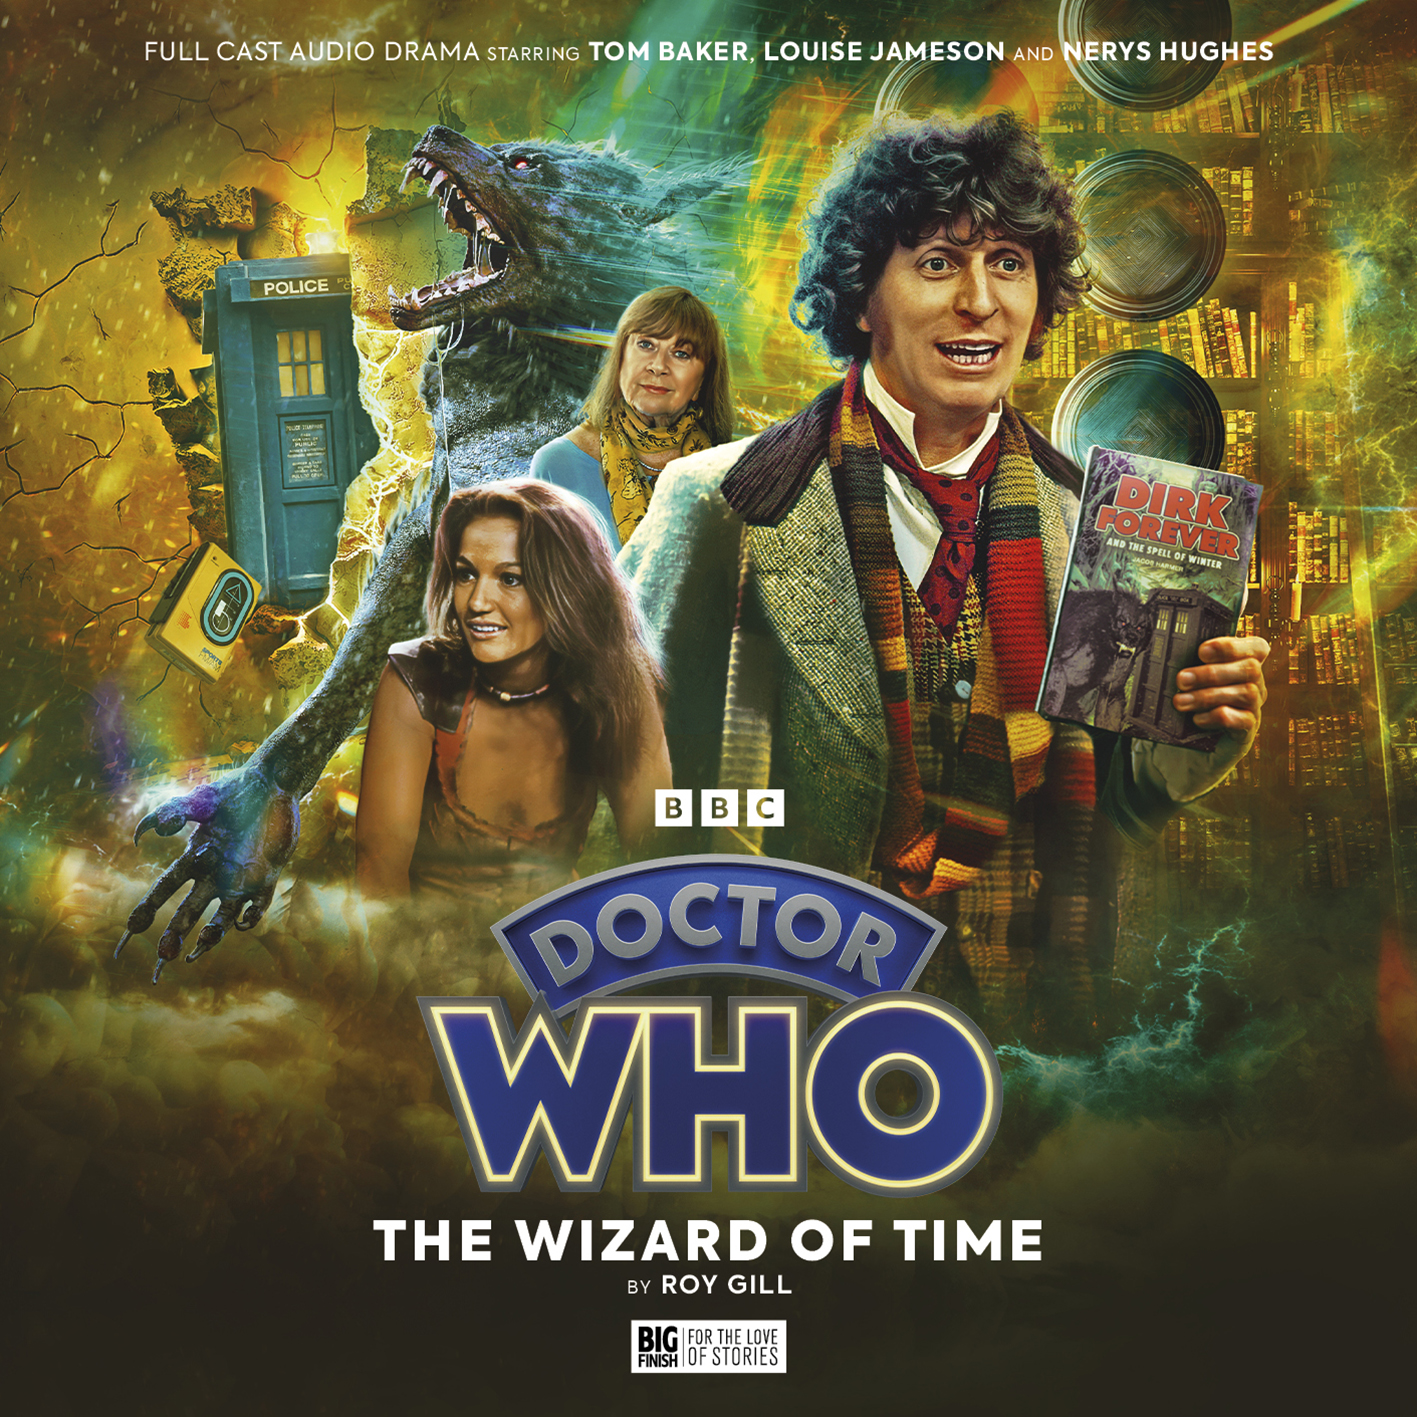 AUDIO: The Wizard of Time [+]Loading...["The Wizard of Time (audio story)"]